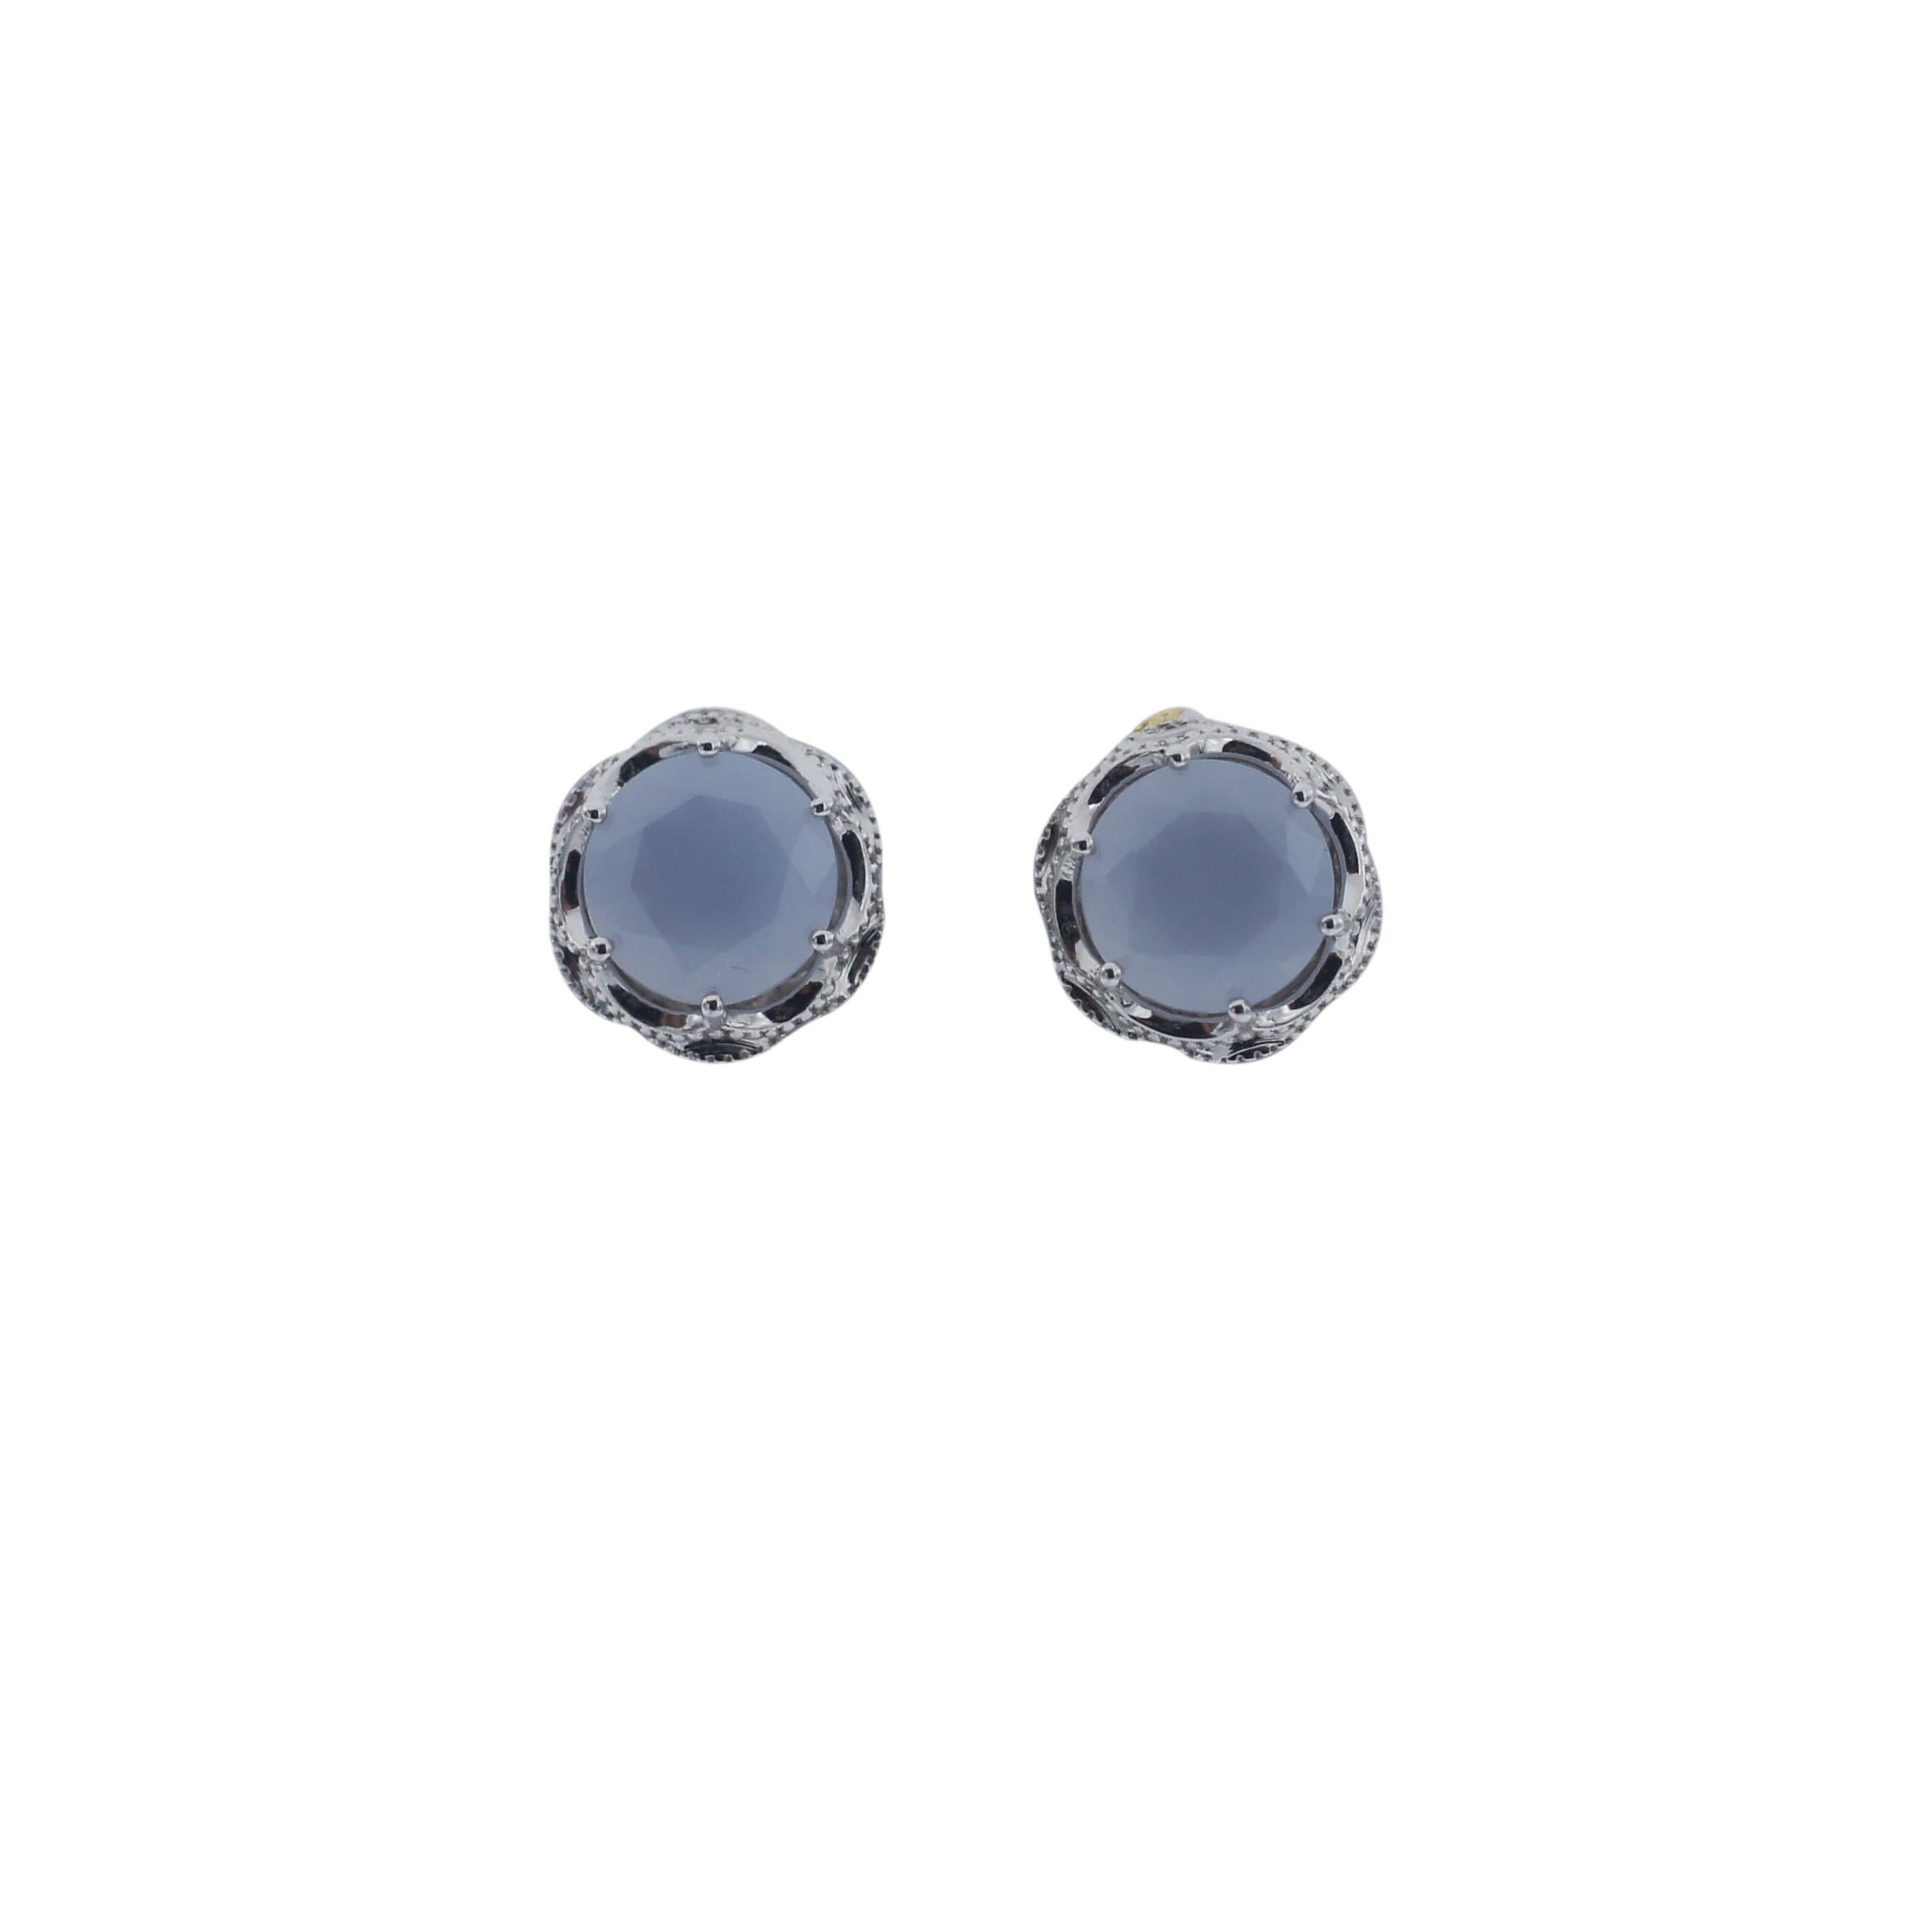 TACORI
Crescent Crown
Stud Earrings
Style SE10503
Chalcedony Gem Stone
Approx. 3.5 carat weight
measures Approx.: .45